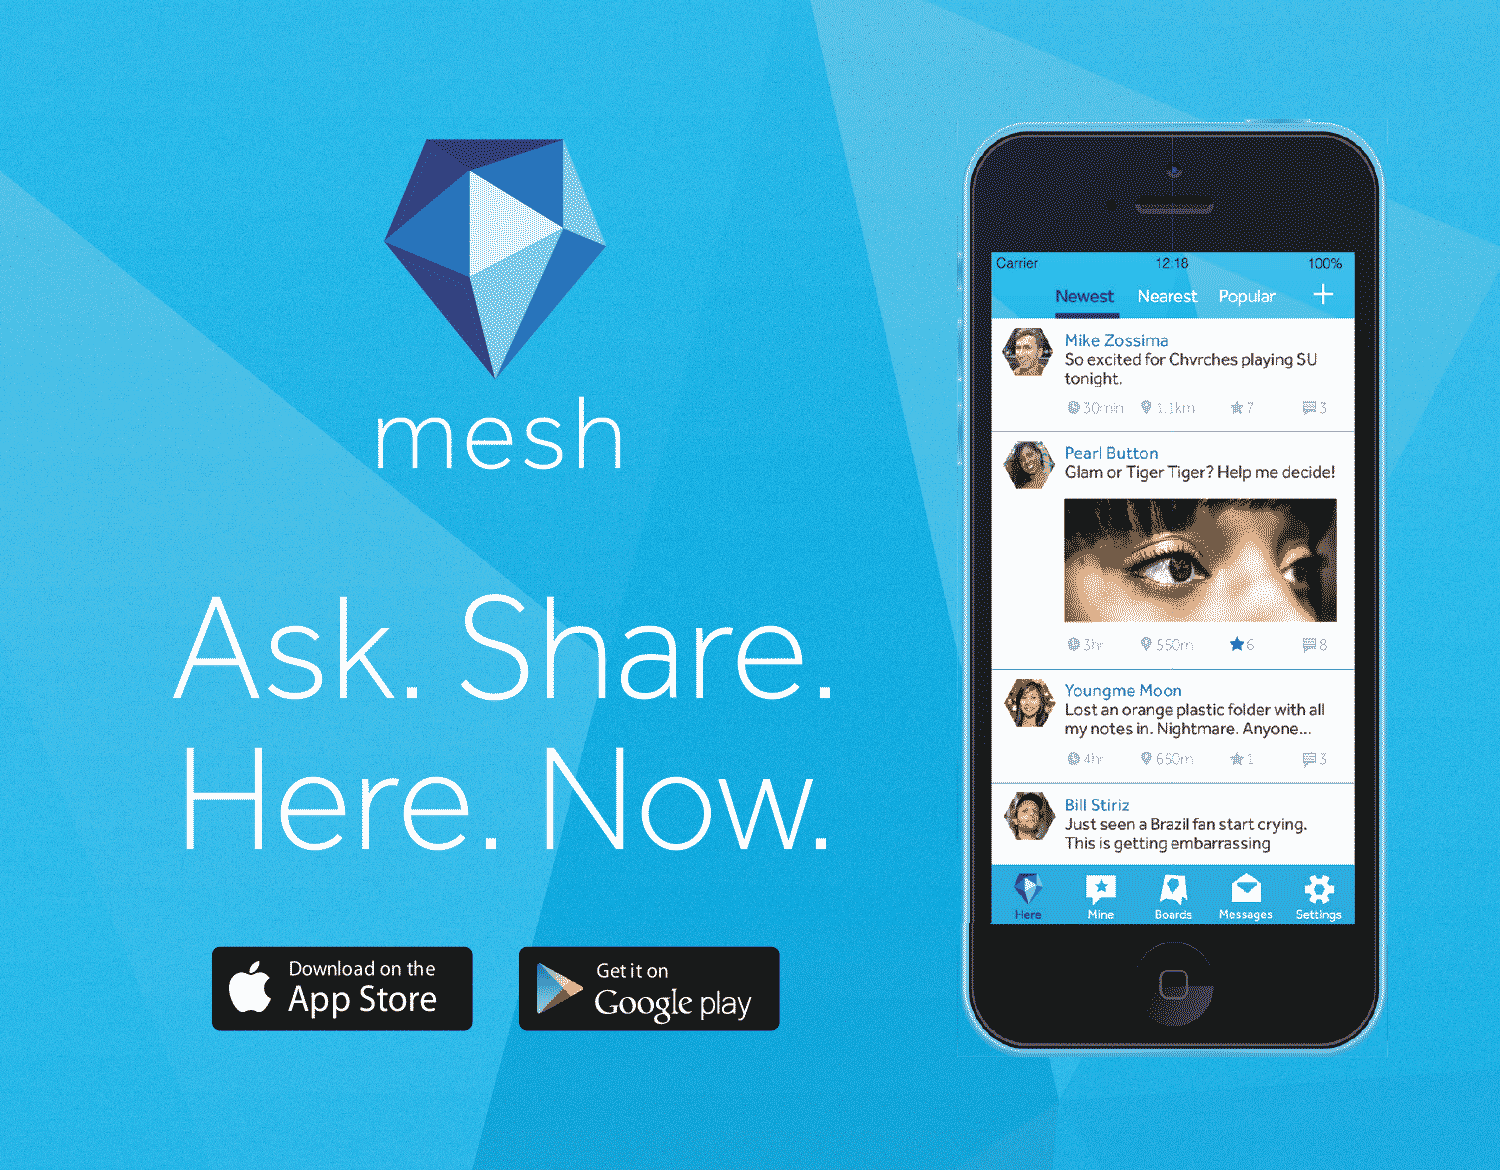 Mesh - Ask. Share. Here. Now